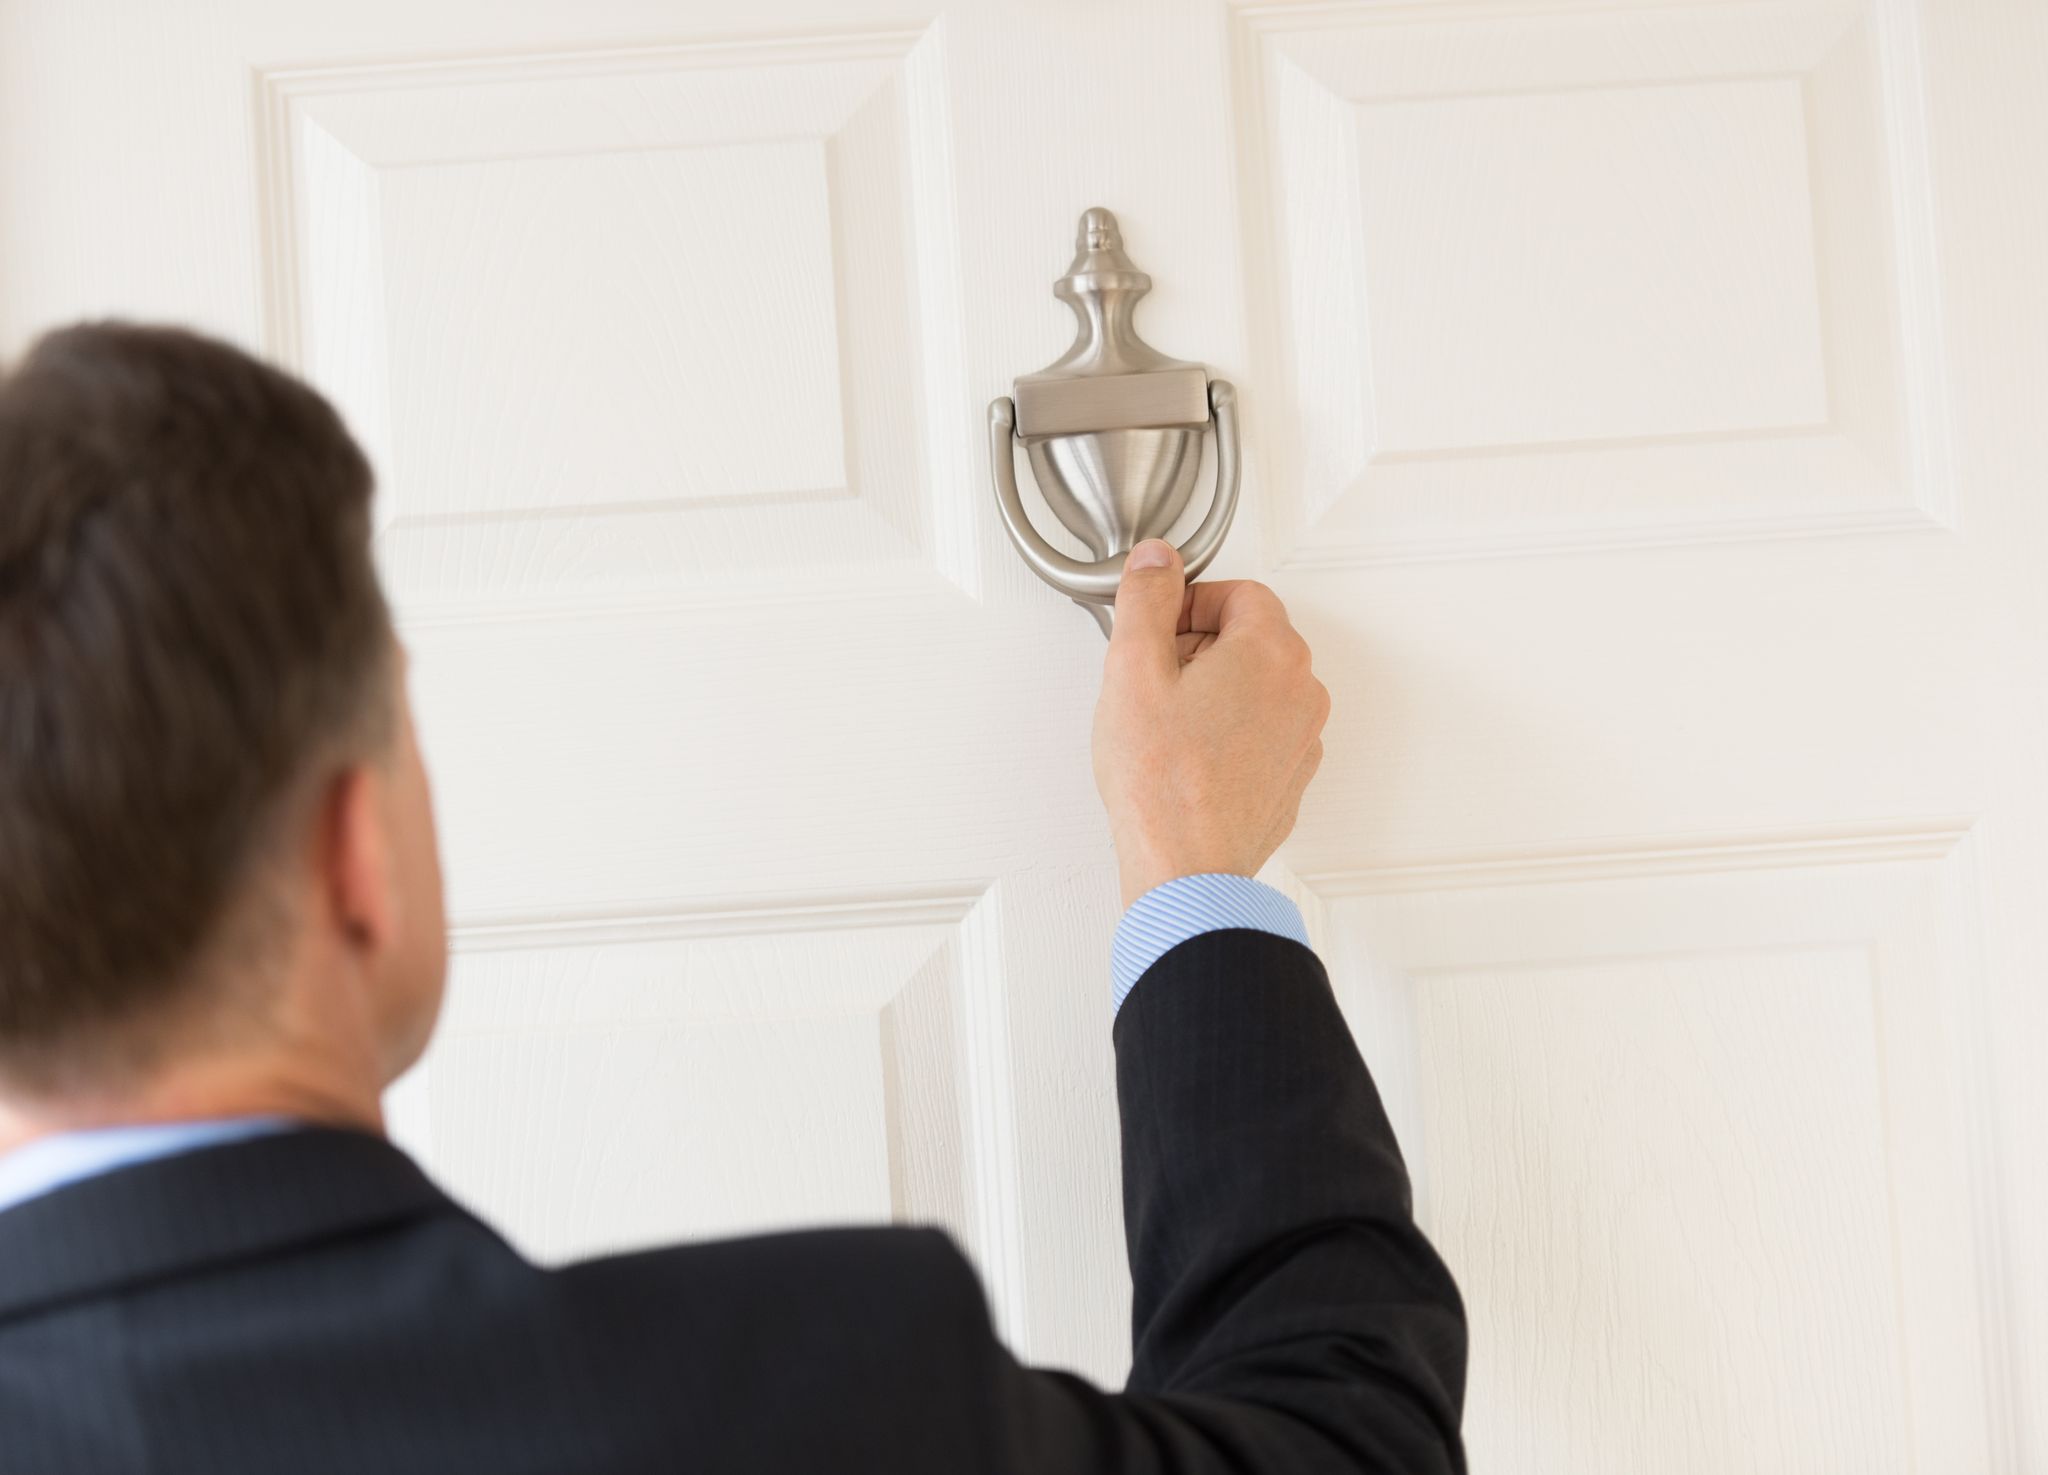 A man knocking on the door. | Source: Getty Images